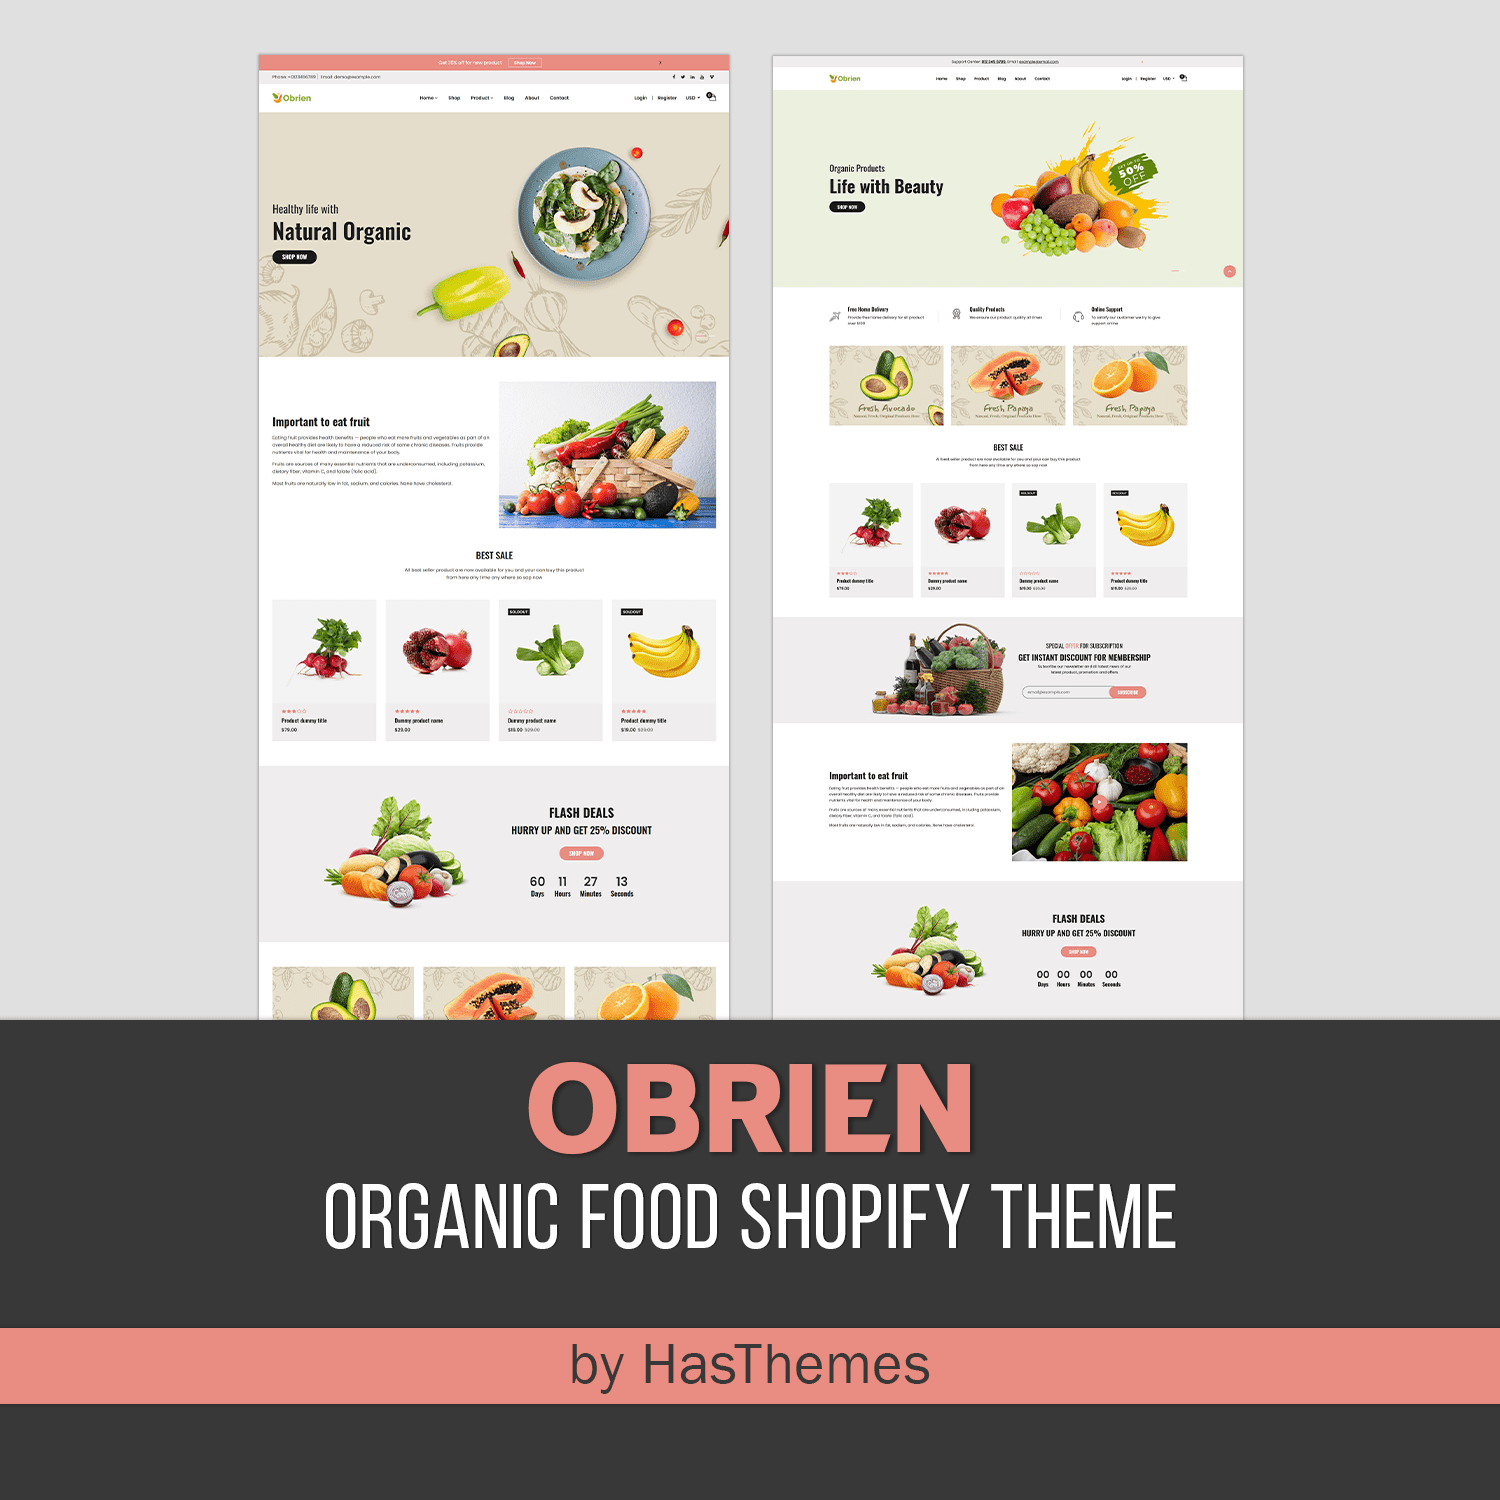 Natural organic products of Organic Food Shopify Theme – Obrien.